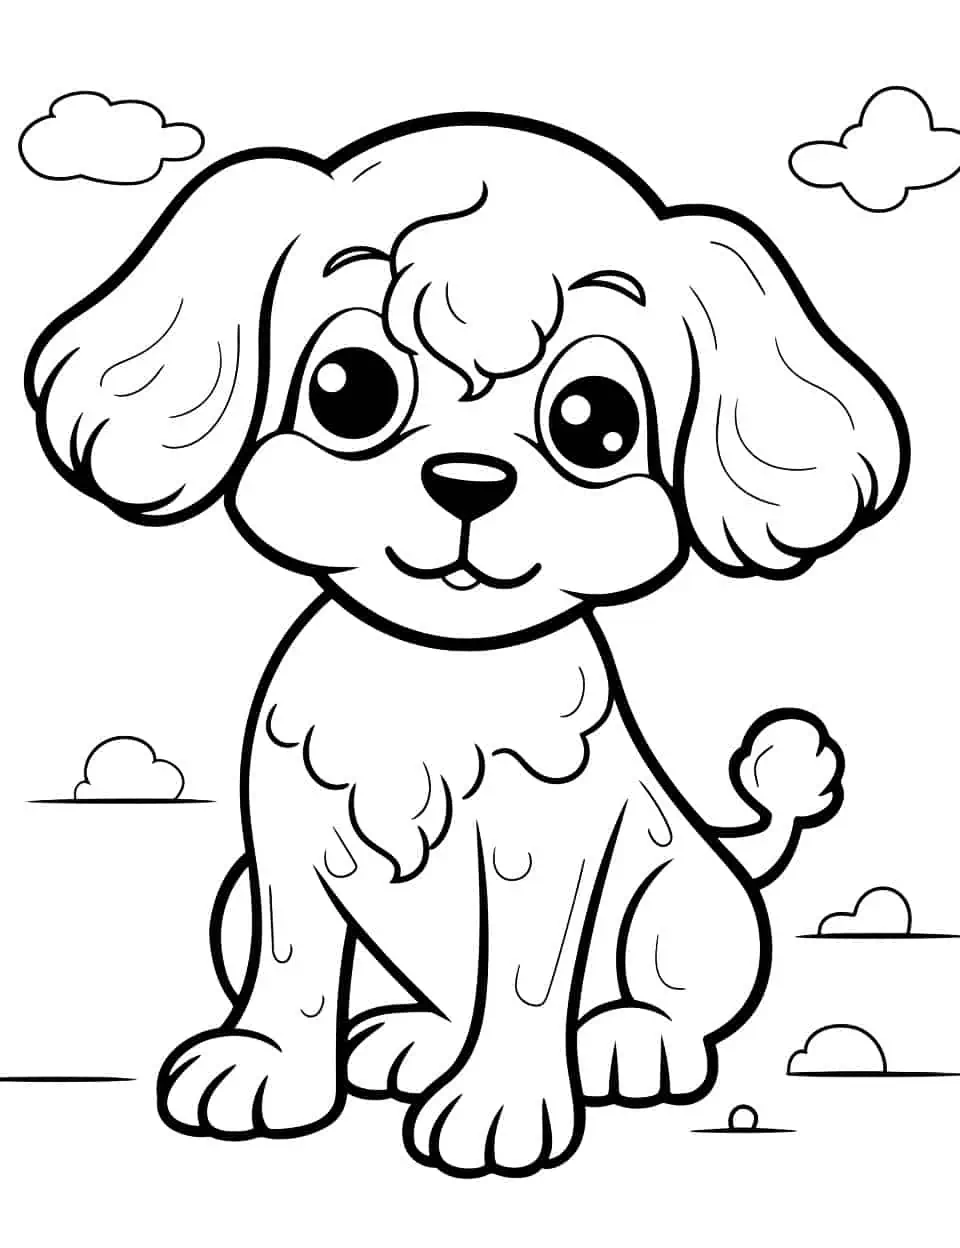 Kawaii Poodle Coloring Page - A super cute Kawaii style Poodle with big, expressive eyes.